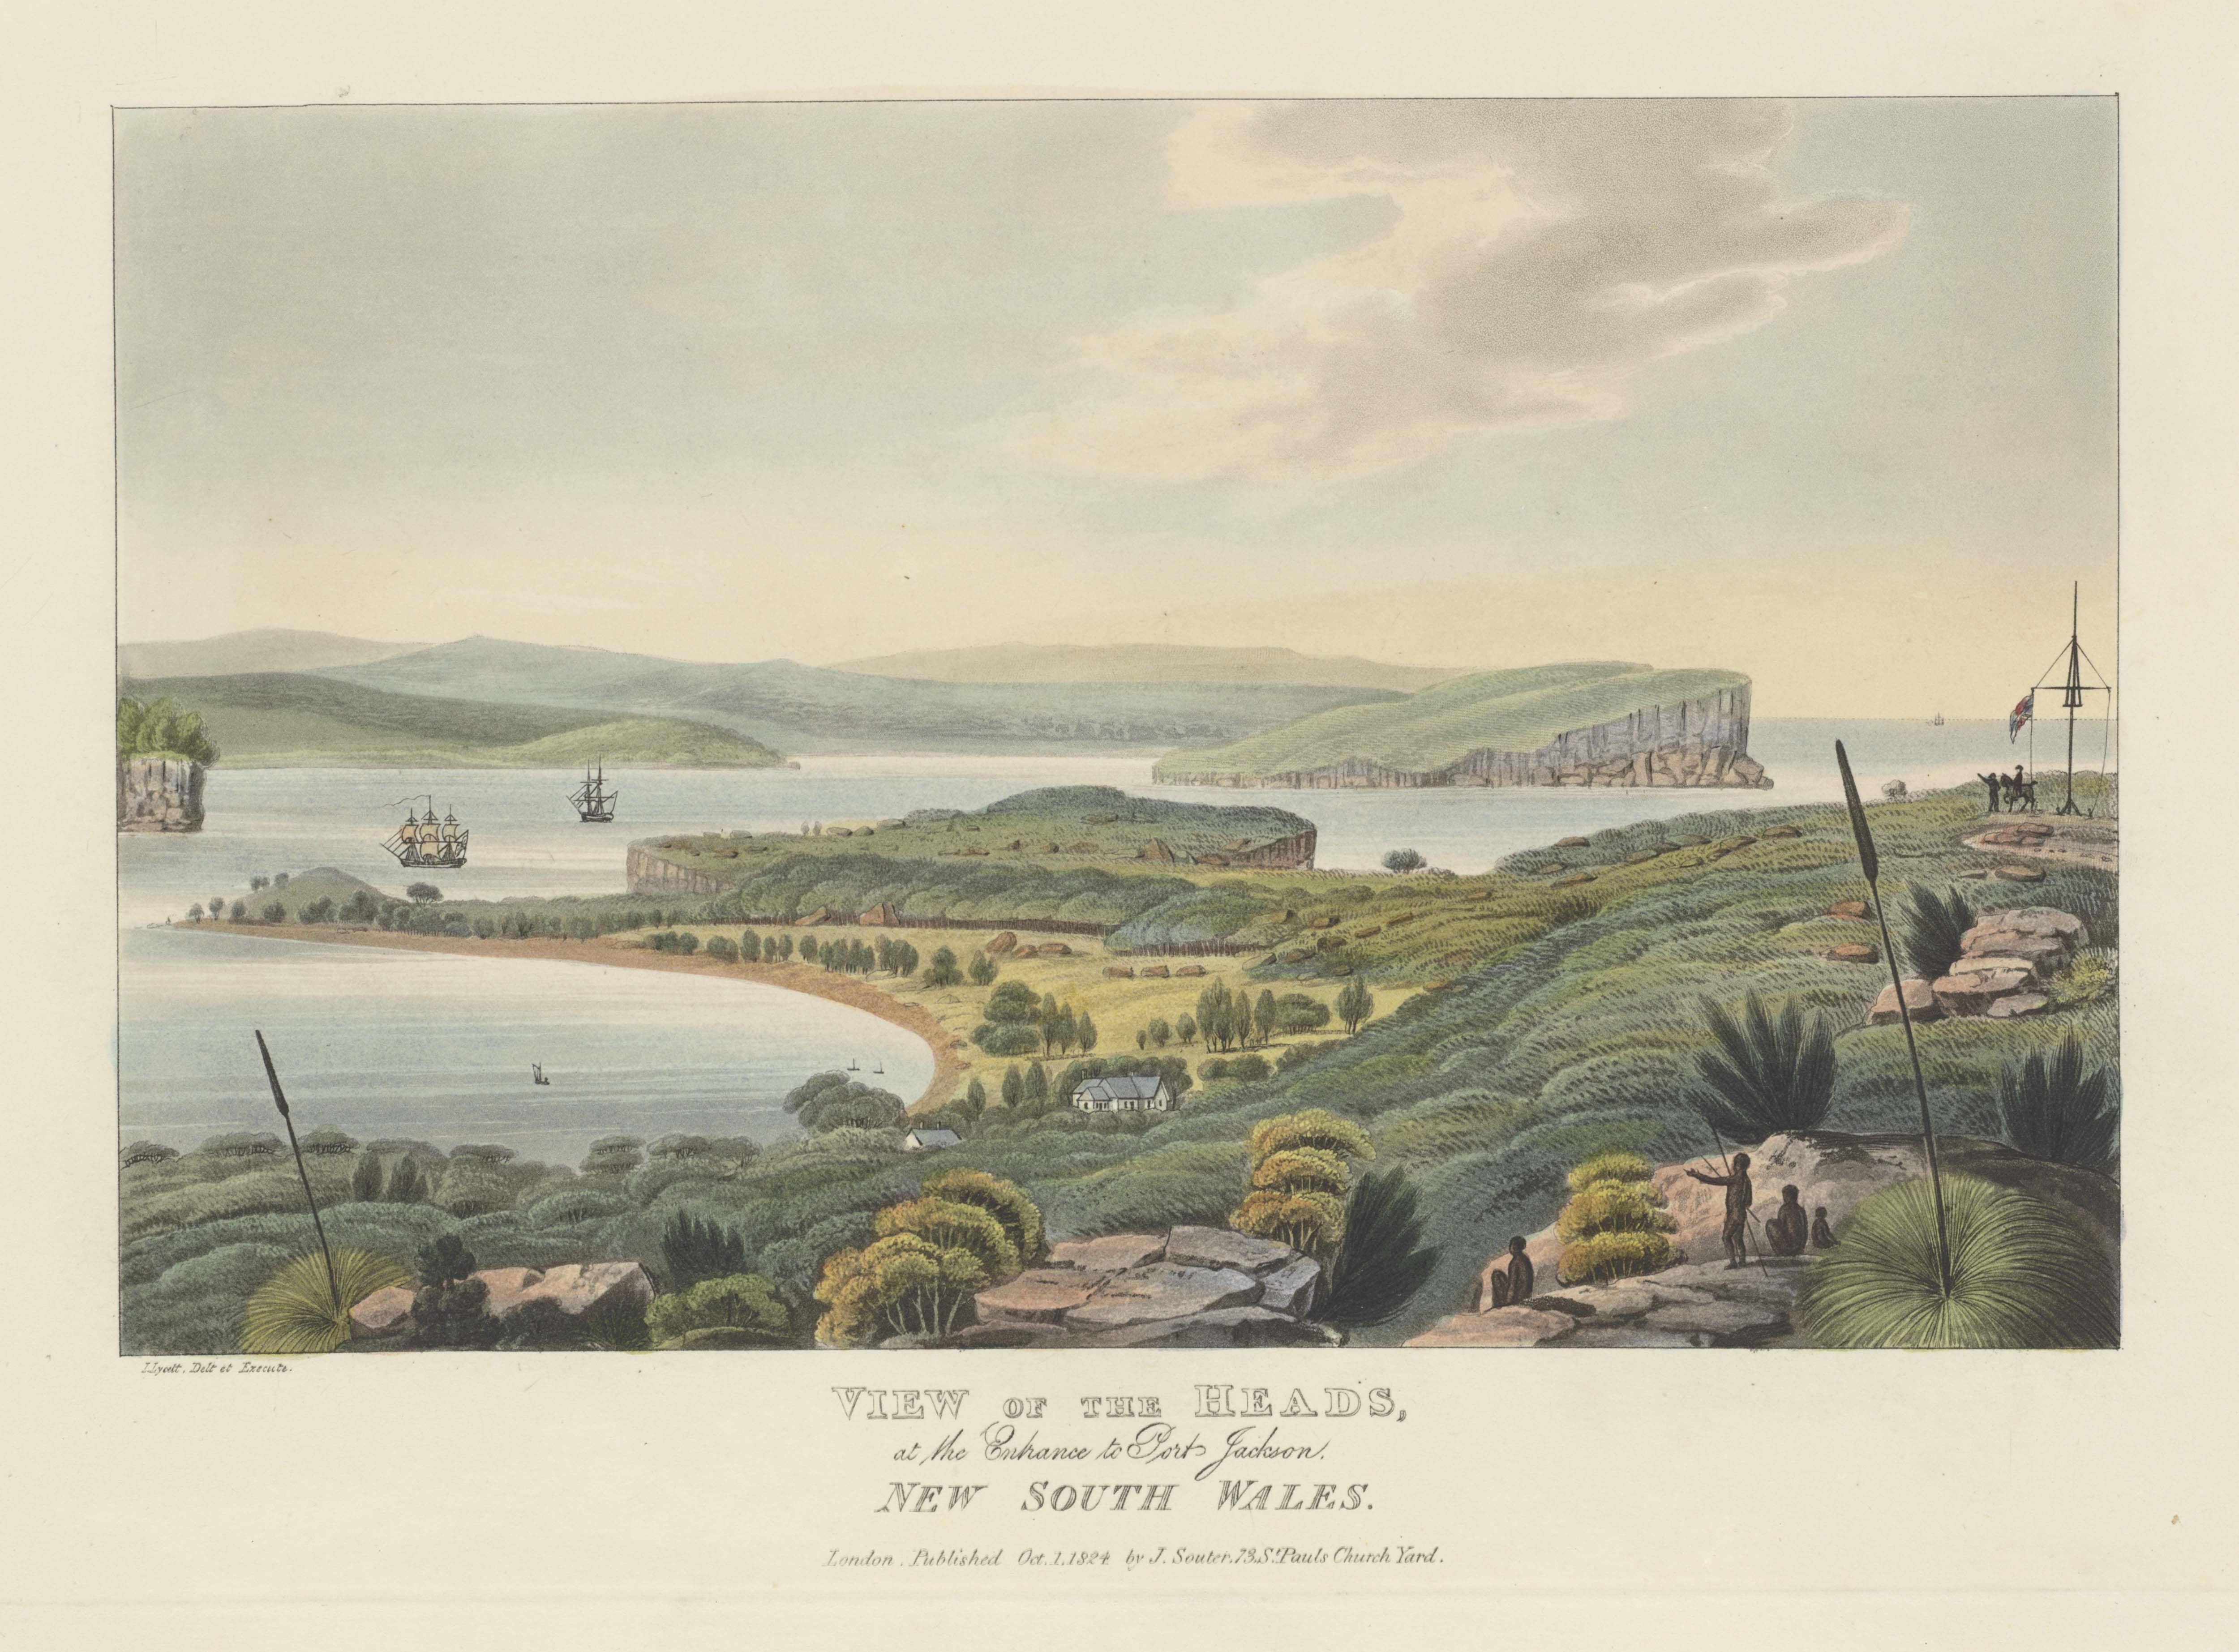 <p>‘View of the Heads at the Entrance to Port Jackson’, by Joseph Lycett, 1824</p>
